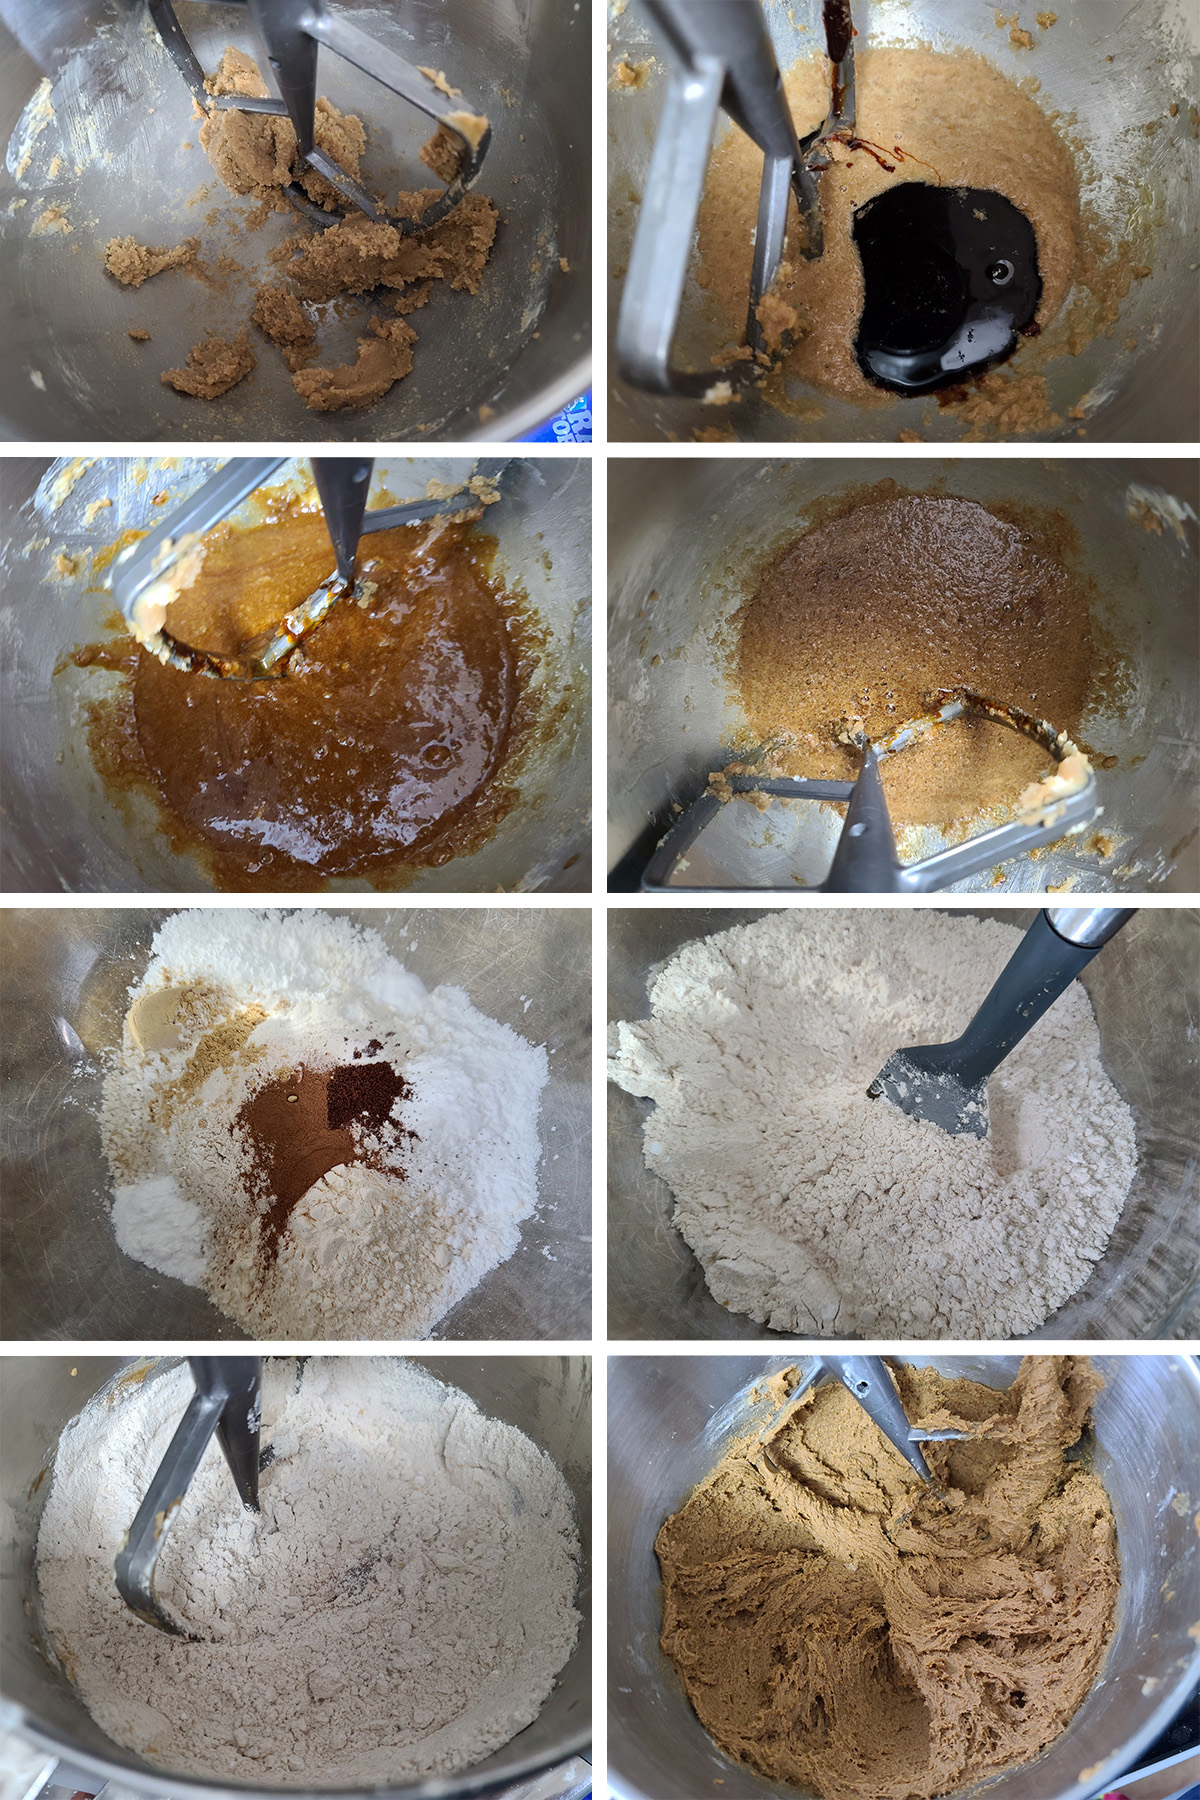 An 8 part image showing the ingredients forming the gingerbread dough.